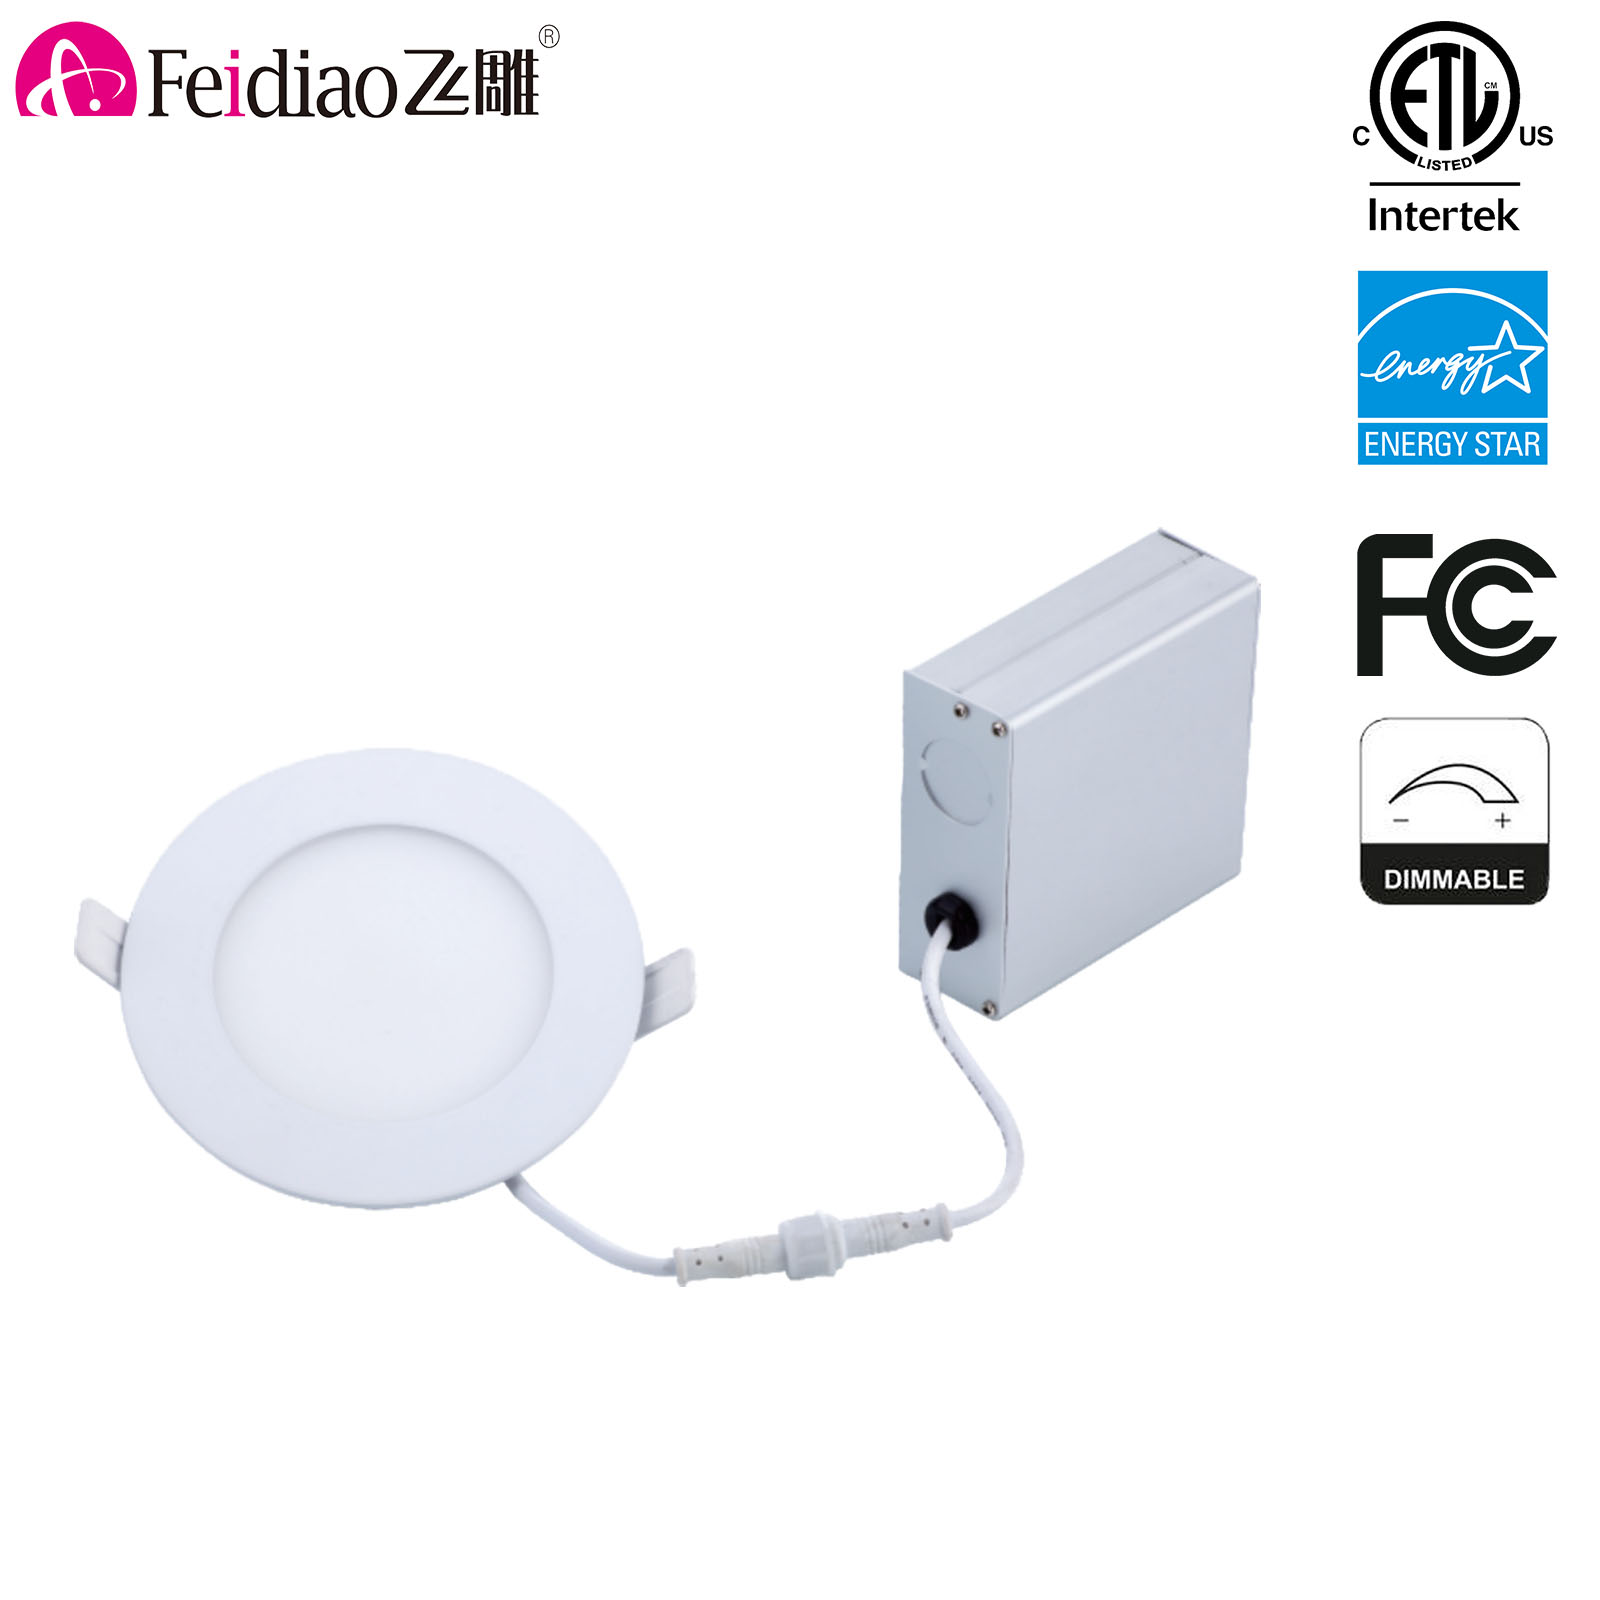 cETL Listed Slim panel light Downlight Dimmable 3 Inch 6W 420lm Recessed Trim Ceiling Light Fixture